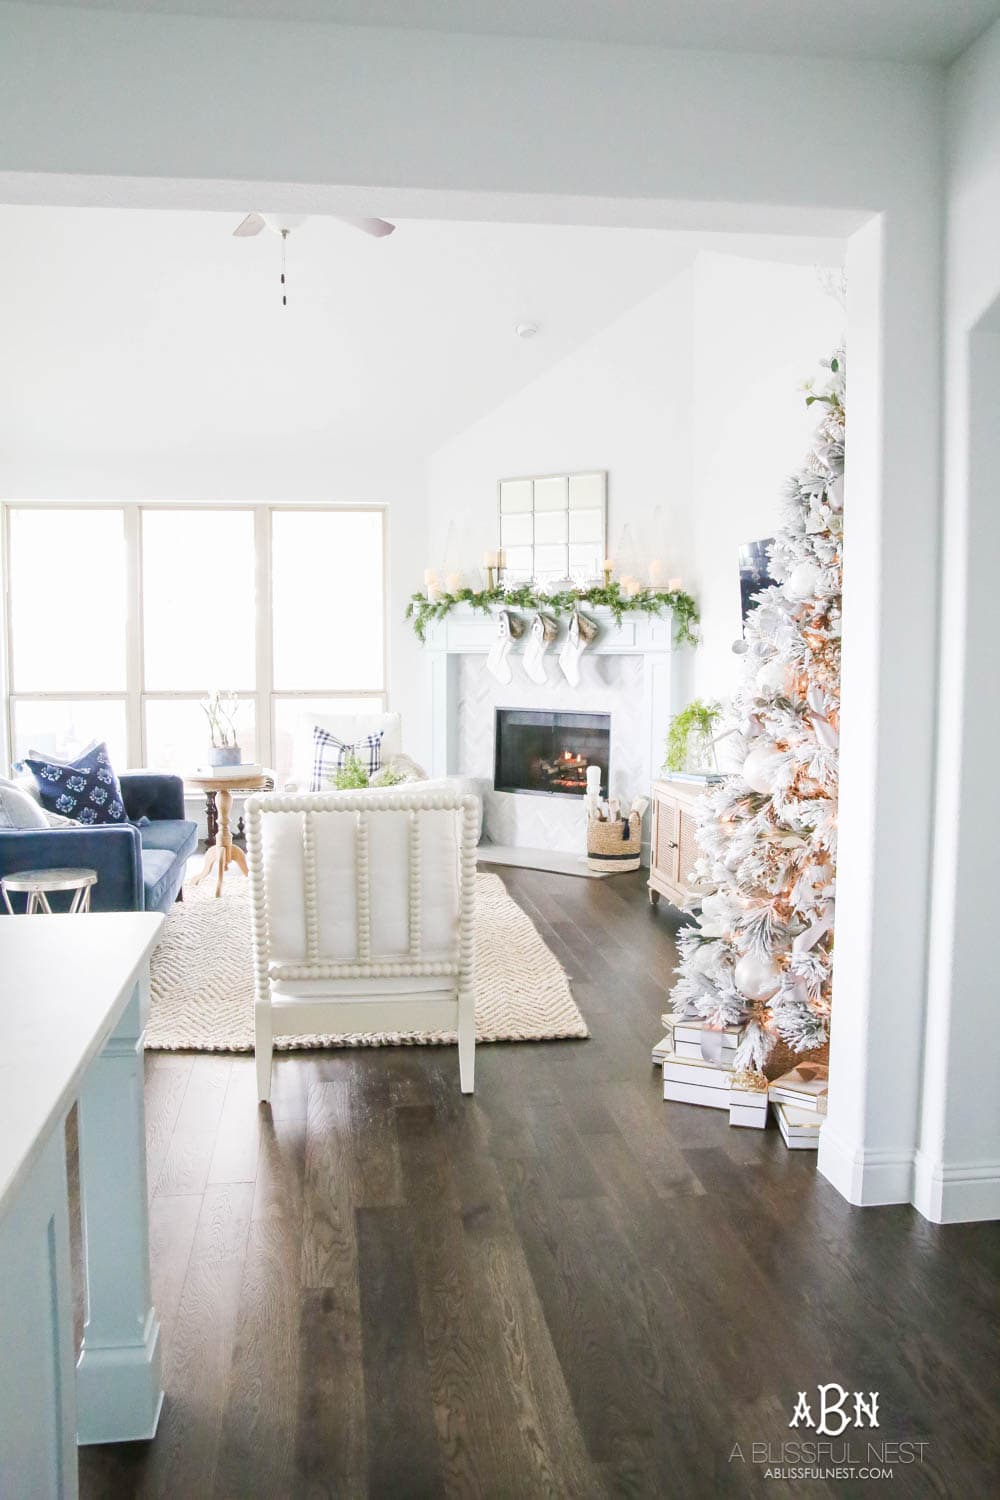 Silver and gold Christmas tree in an open concept floor plan with lots of blue home decor accents. Check out all the white, silver and gold Christmas decor in this holiday home tour on ABlissfulNest.com. #ABlissfulNest #Christmasdecor #Christmasdecorating #CoastalChristmasdecor #christmastree